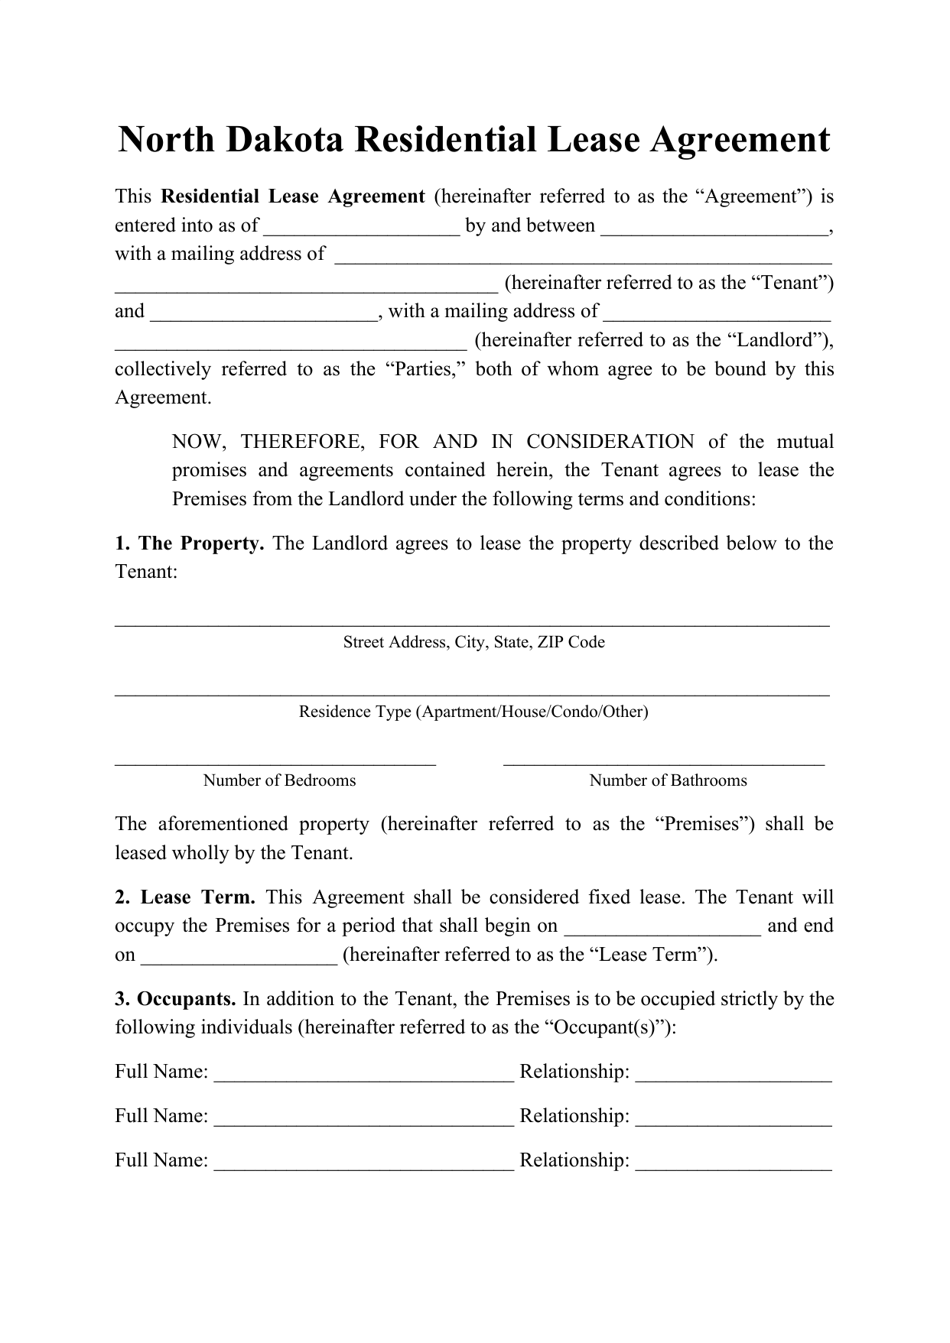 Residential Lease Agreement Template - North Dakota, Page 1